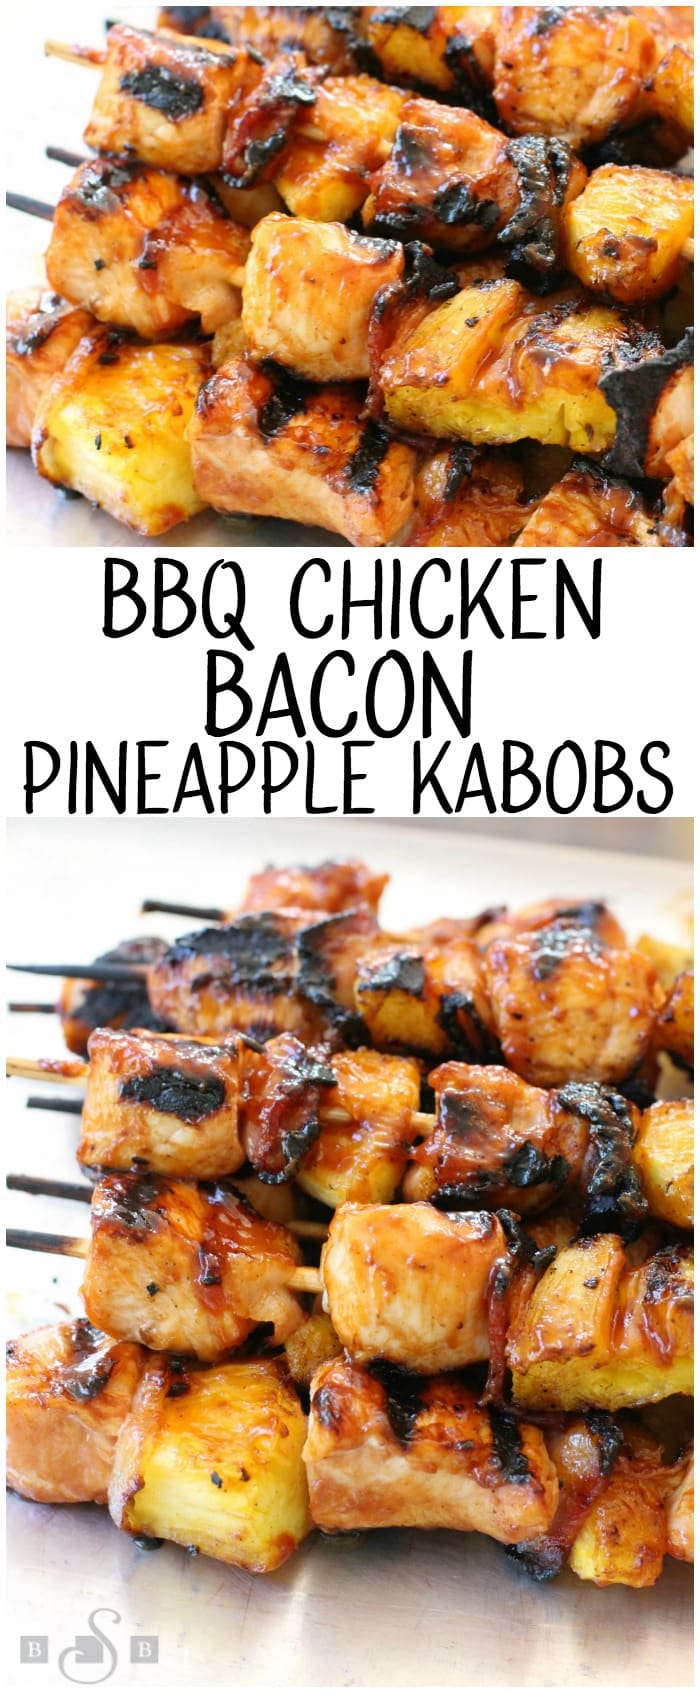 BBQ Chicken Kabobs with Bacon and Pineapple recipe with tender chicken grilled with pineapple and bacon then slathered with your favorite BBQ sauce. These are the ultimate BBQ chicken kabobs and are perfect for your next cookout! Easy and SUPER TASTY BBQ Chicken Kabob recipe from Butter With A Side of Bread